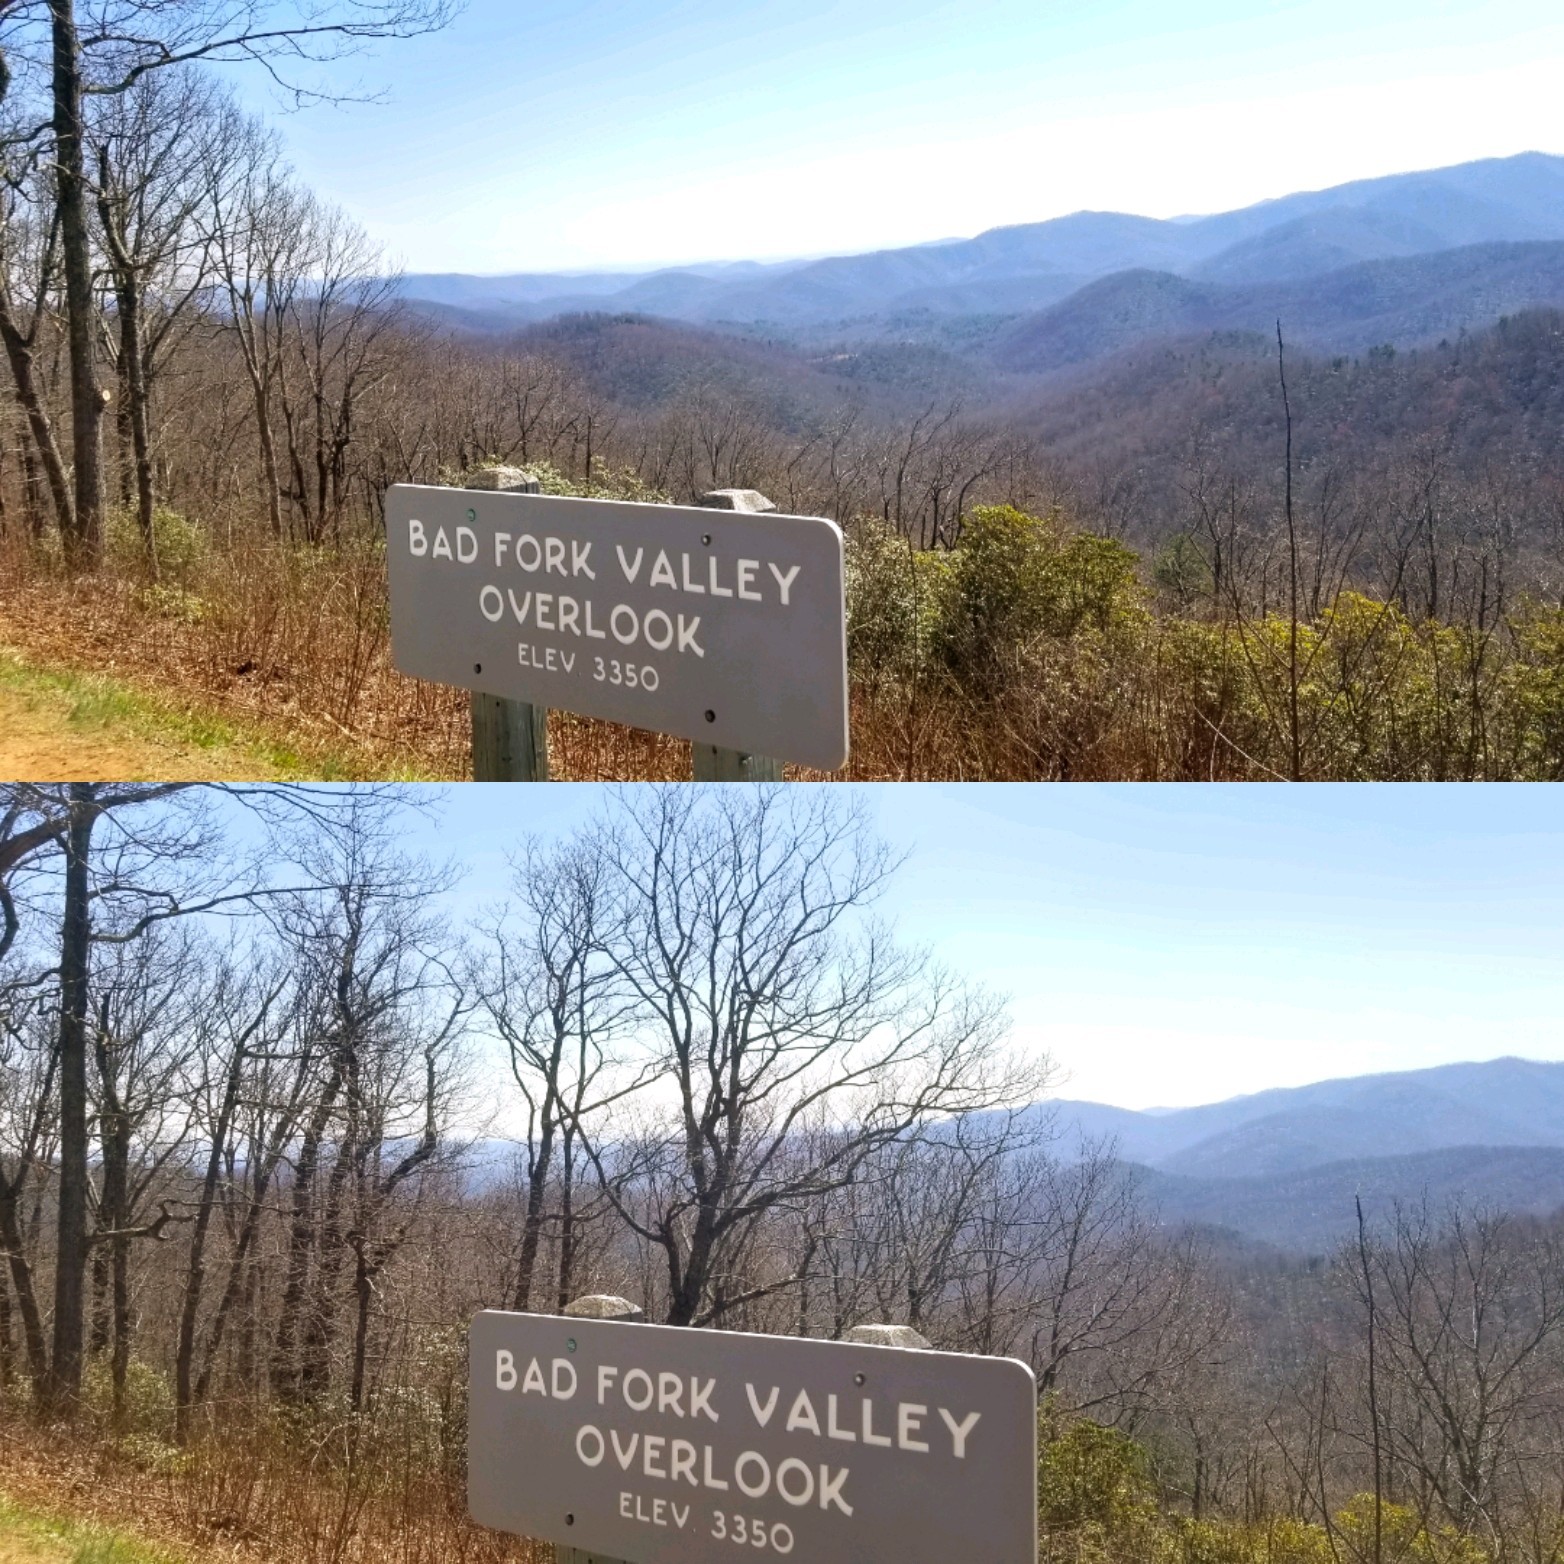 An overlook before arborists cleared the view (bottom) and after (top)